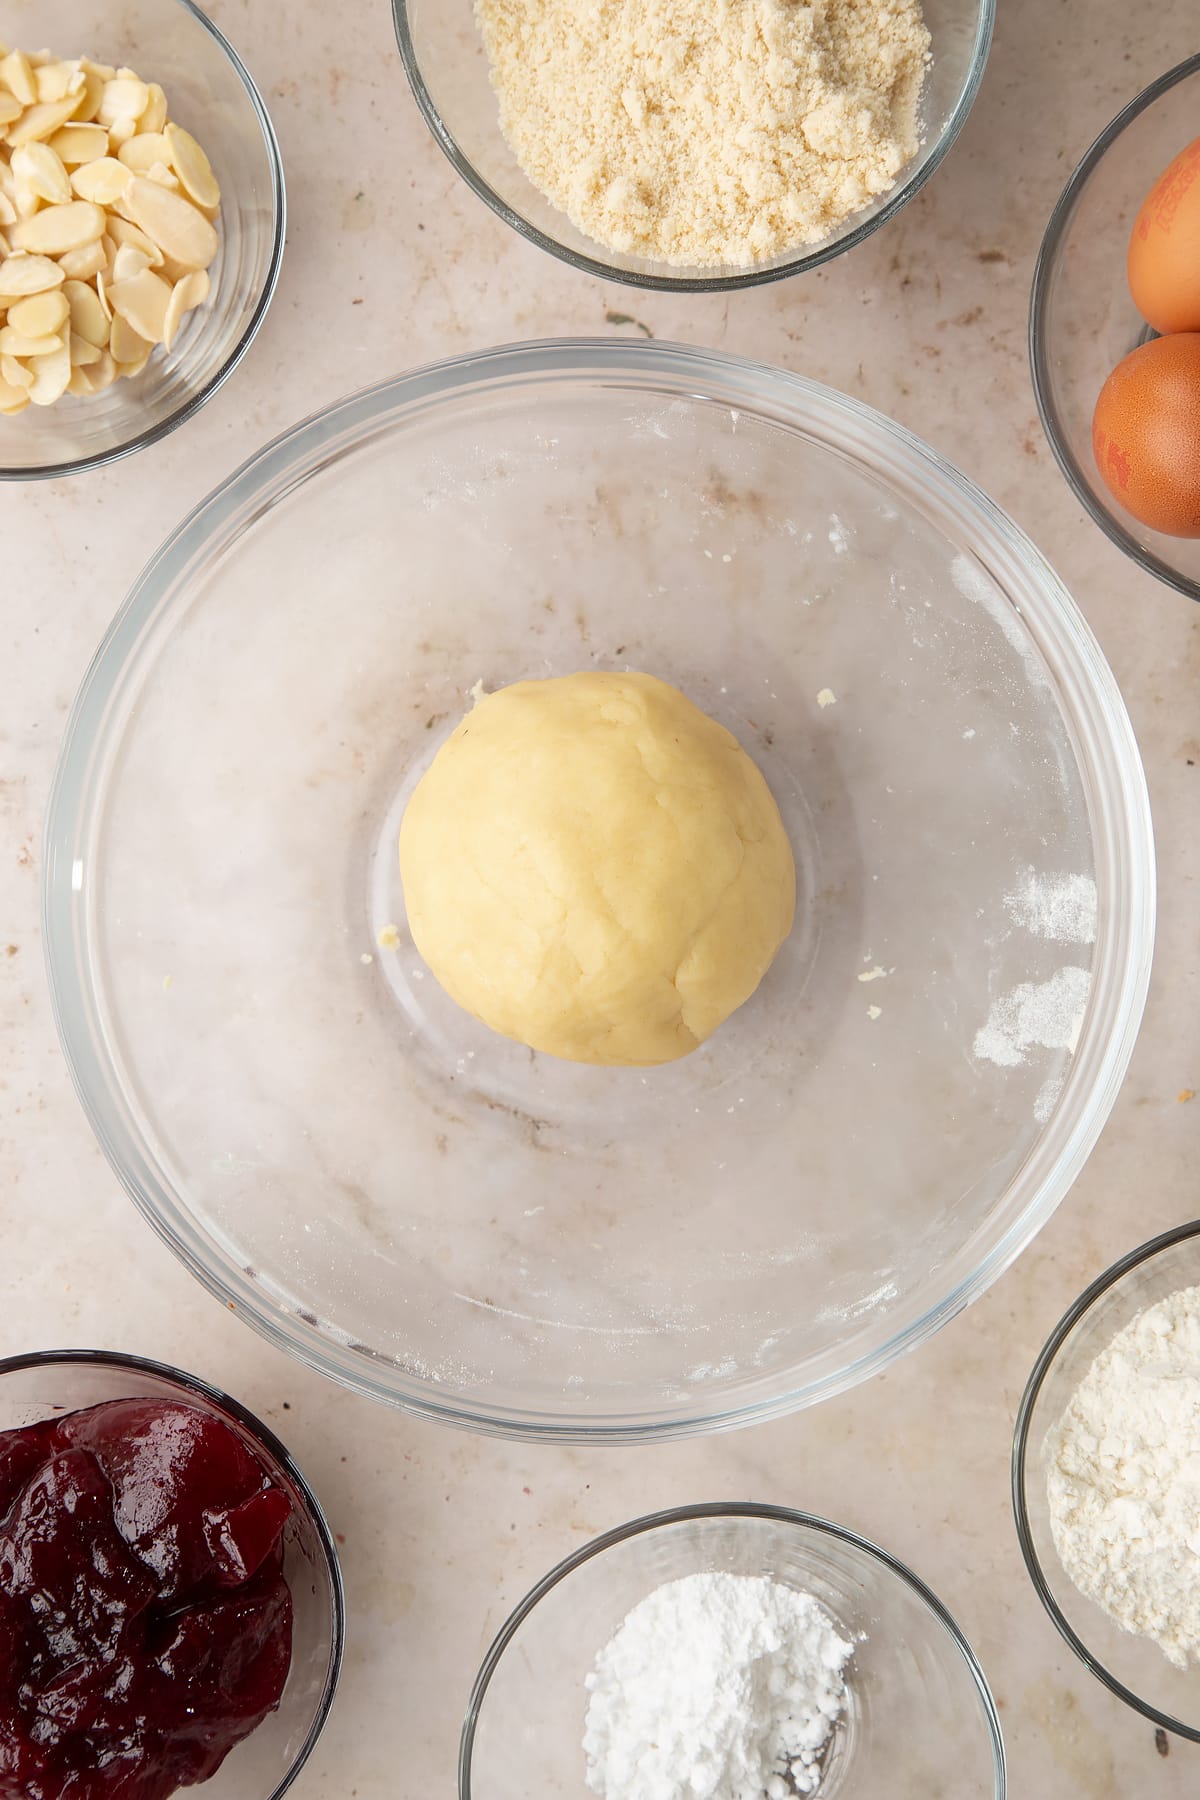 A ball of pastry in a bowl. Ingredients to make a Bakewell tray bake surround the bowl.